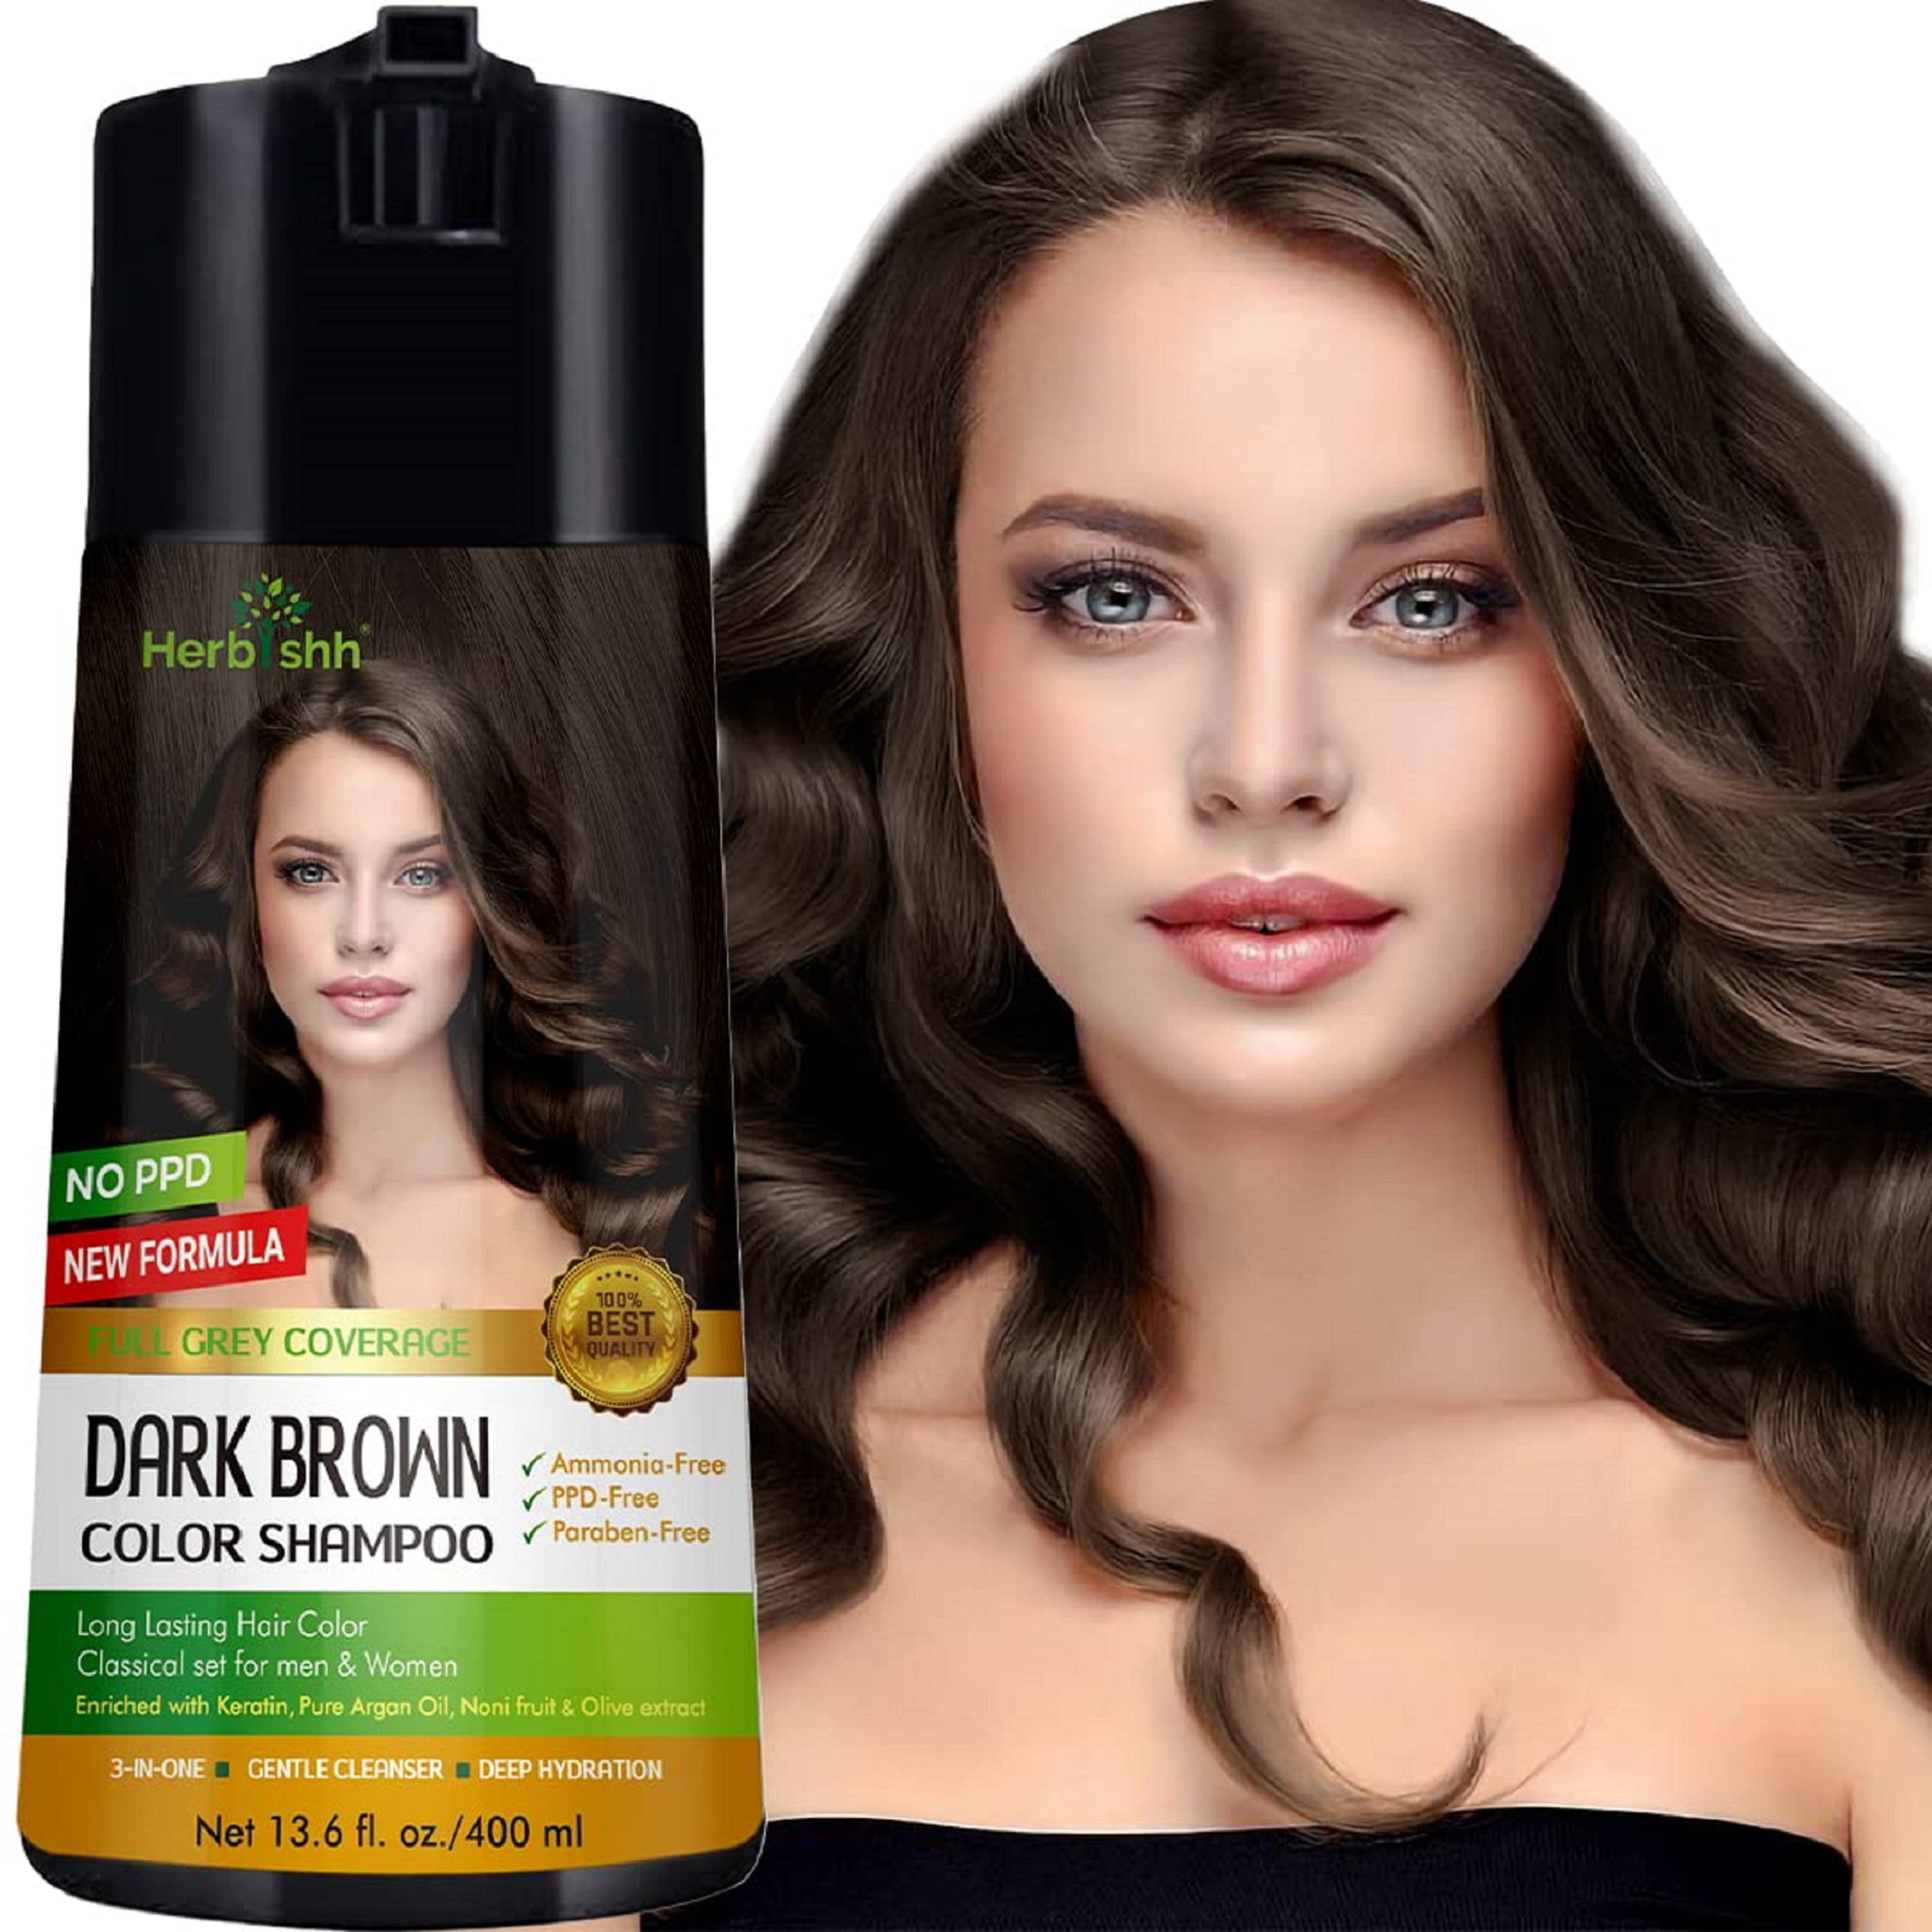 Share 154+ allergy free hair color super hot